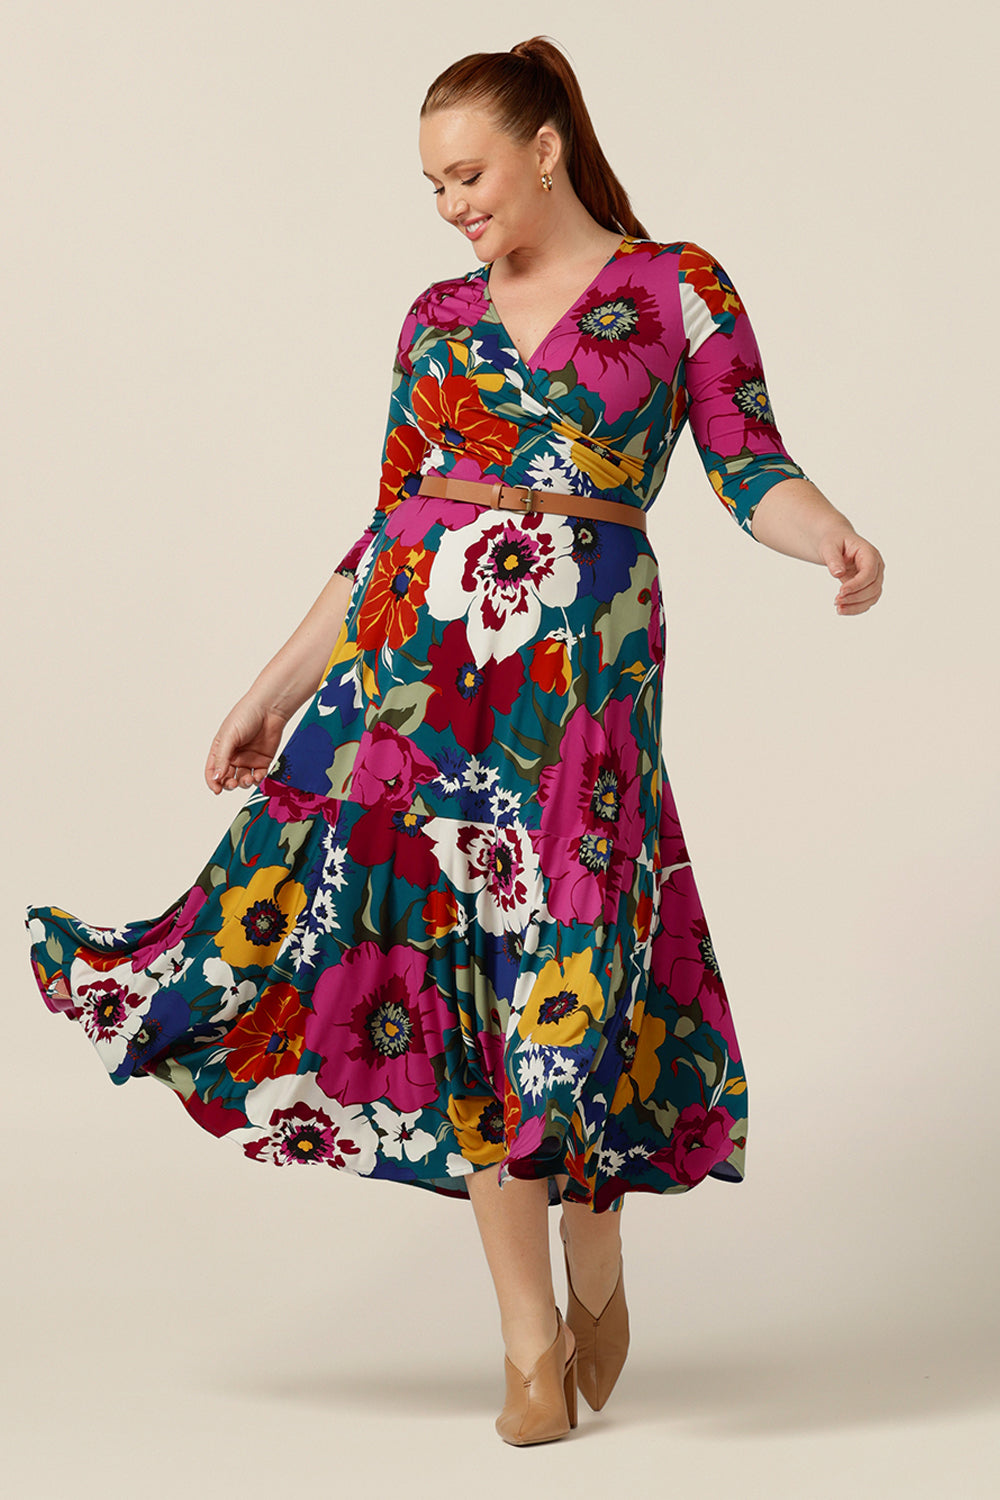 A size 12, curvy woman wears a fixed wrap dress in floral print jersey. Made in Australia by  Australian and New Zealand women's clothing label, L&F this jersey wrap dress with 3/4 sleeves is reversible and can be worn with a boat neckline. A dress for work or occasion wear, shop this maxi dress online.